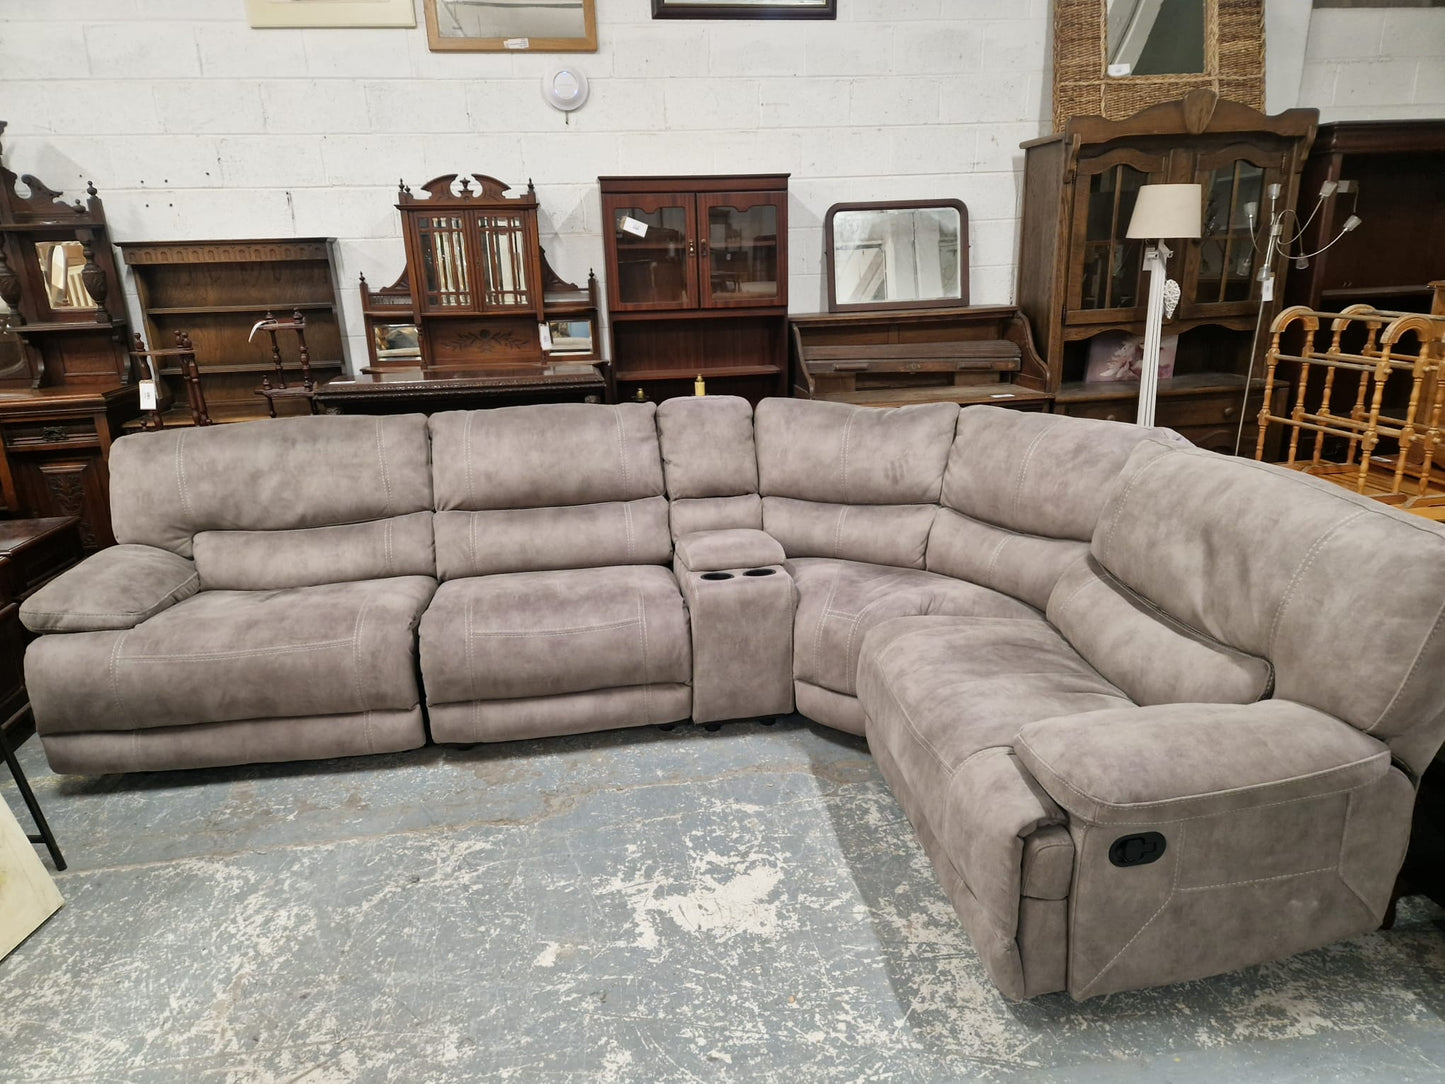 L shaped large sectional FABRIC recliner corner suite with storage and drinks holder